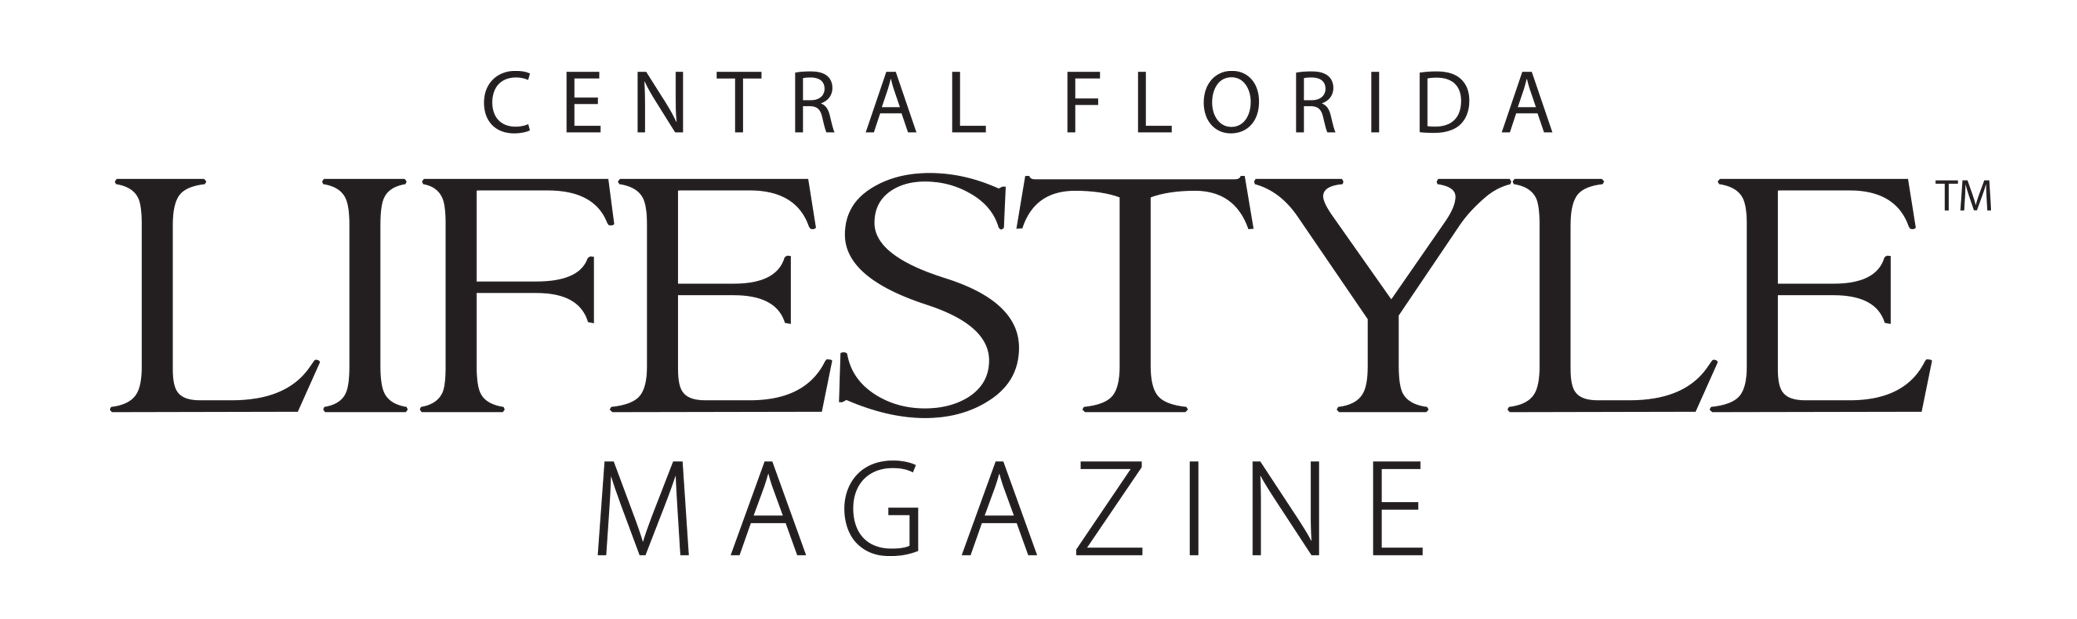 Central Florida Lifestyle Magazine Presents the 6th Annual Cutest Toddler Contest, Sponsored by AdventHealth for Children